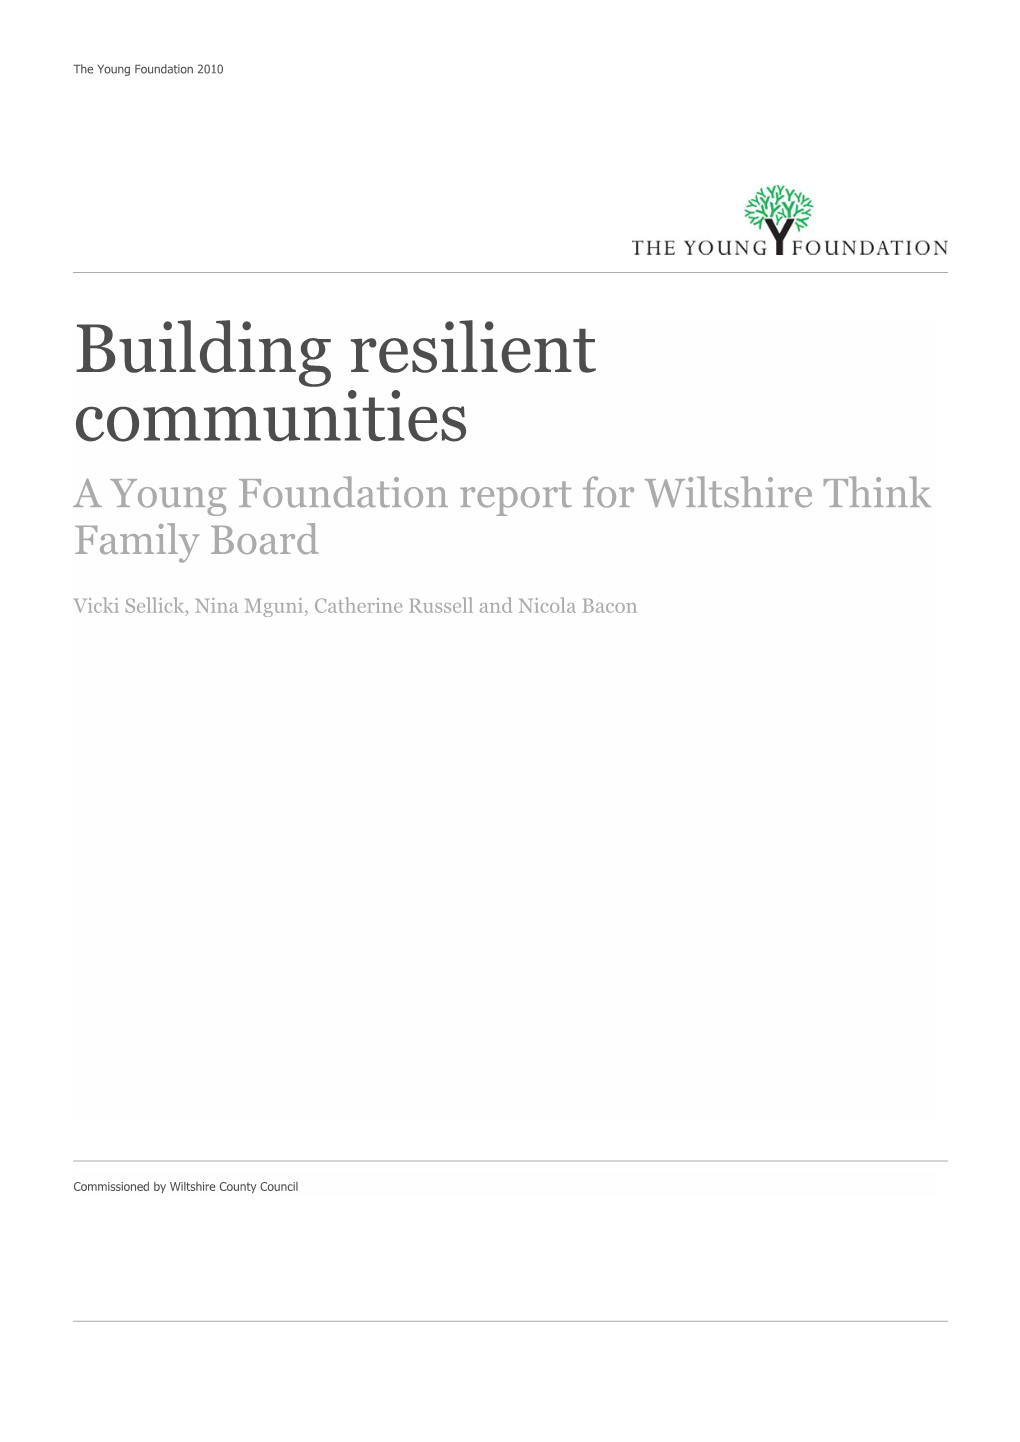 Building Resilient Communities a Young Foundation Report for Wiltshire Think Family Board